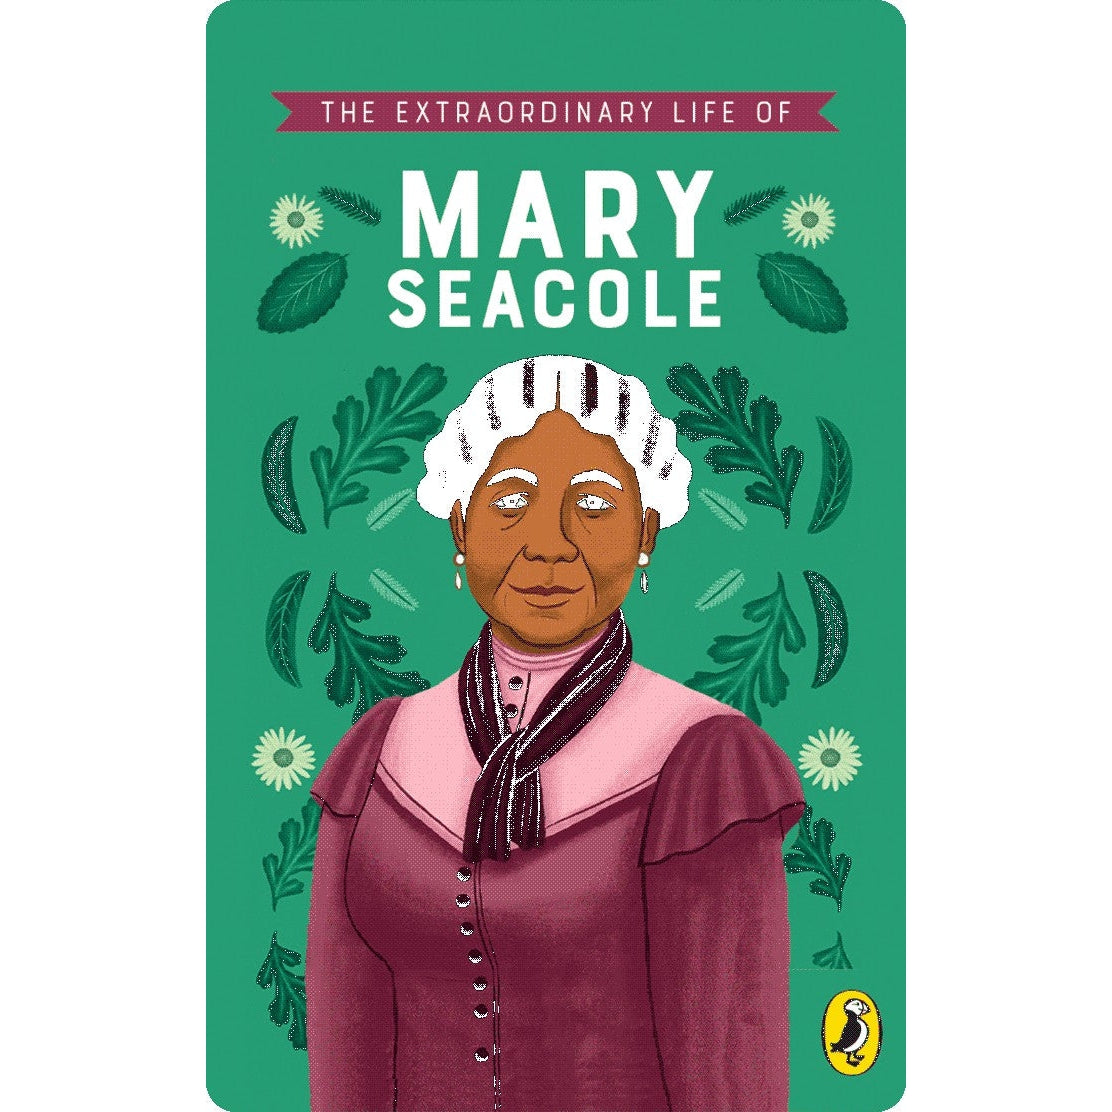 Yoto Card - The Extraordinary Life of Mary Seacole - Child Friendly Audio Story Card for the Yoto Player